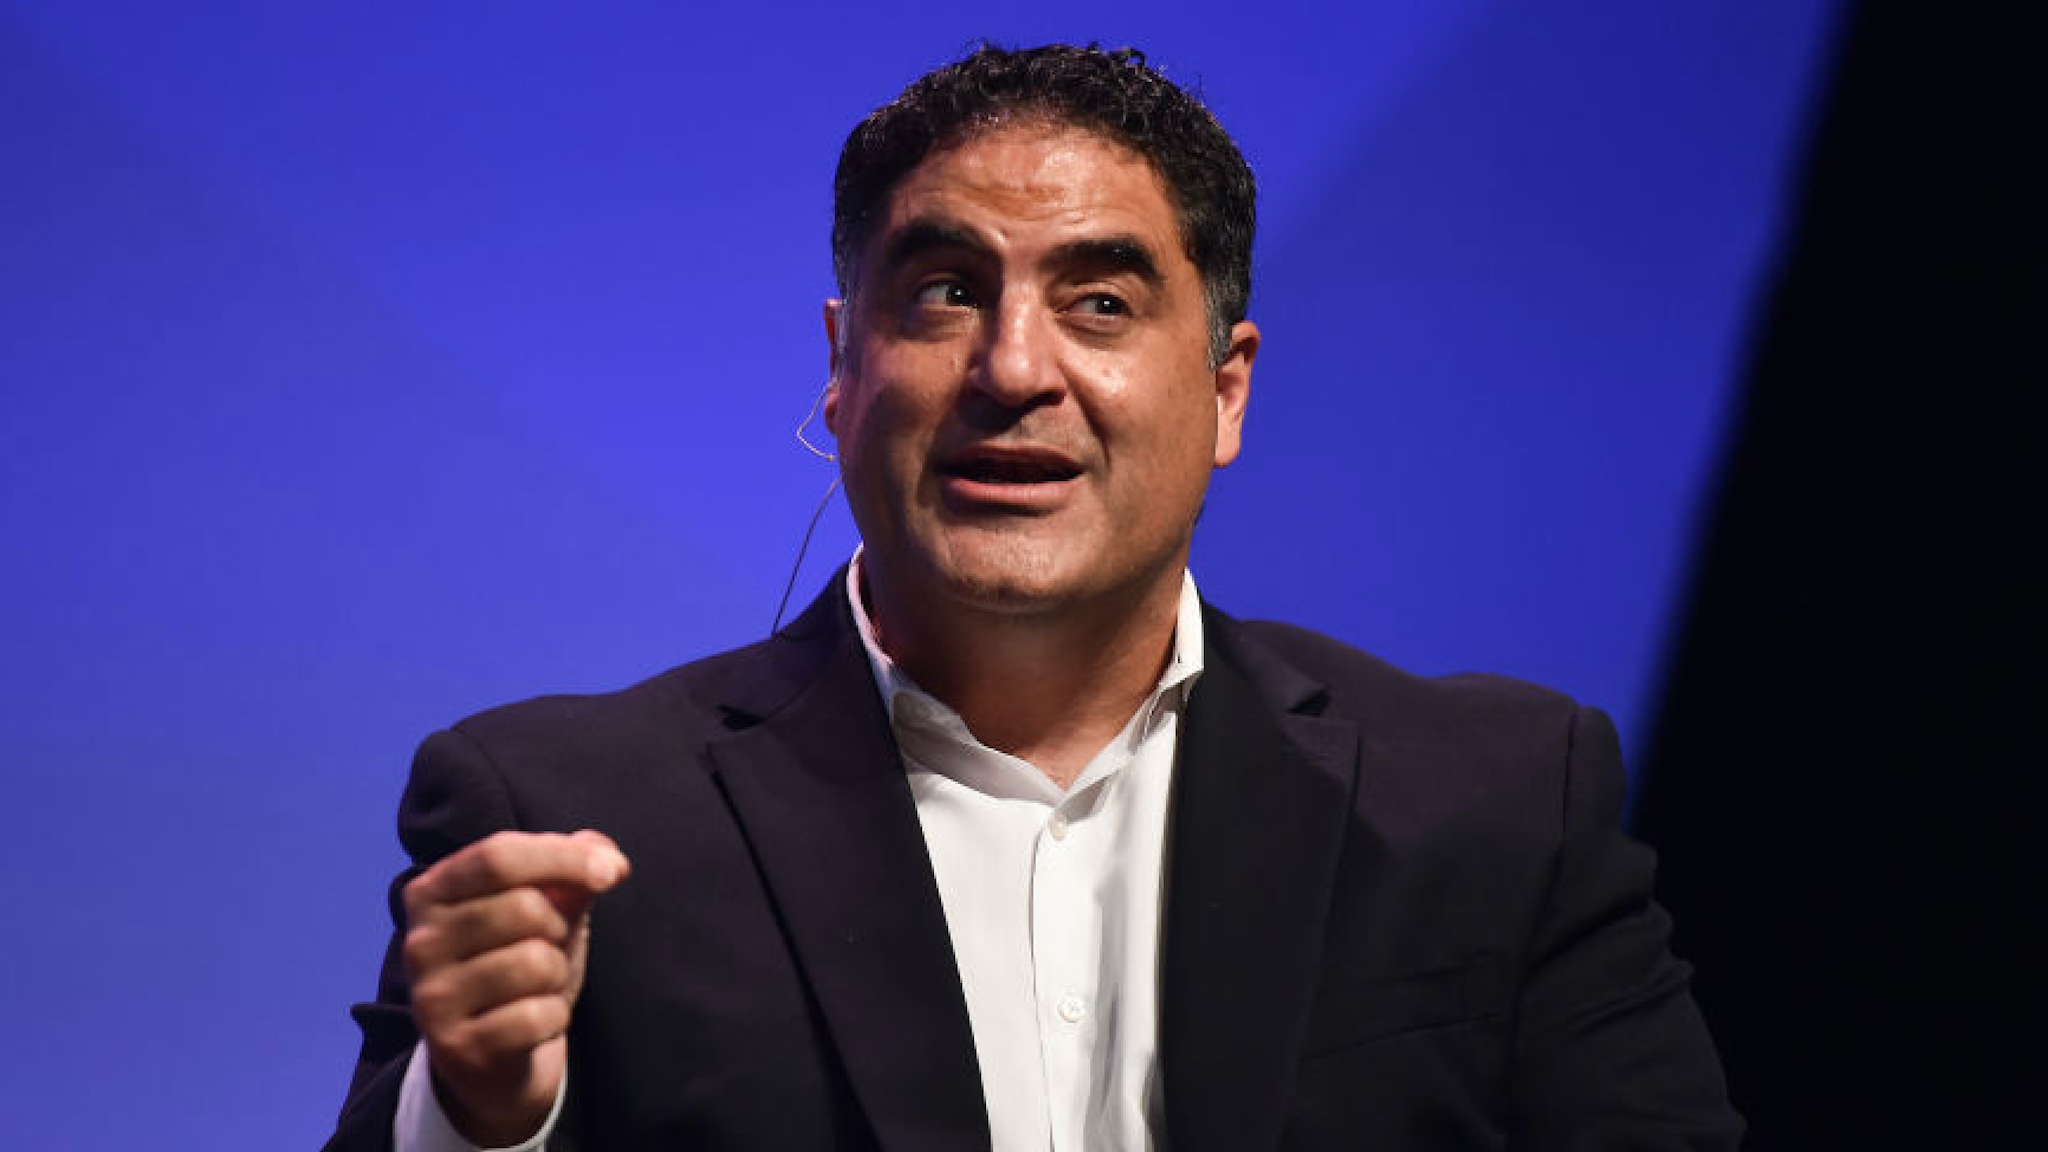 Cenk Uygur, The Young Turks on centre stage during day one of Collision 2018 at Ernest N. Morial Convention Center in New Orleans.